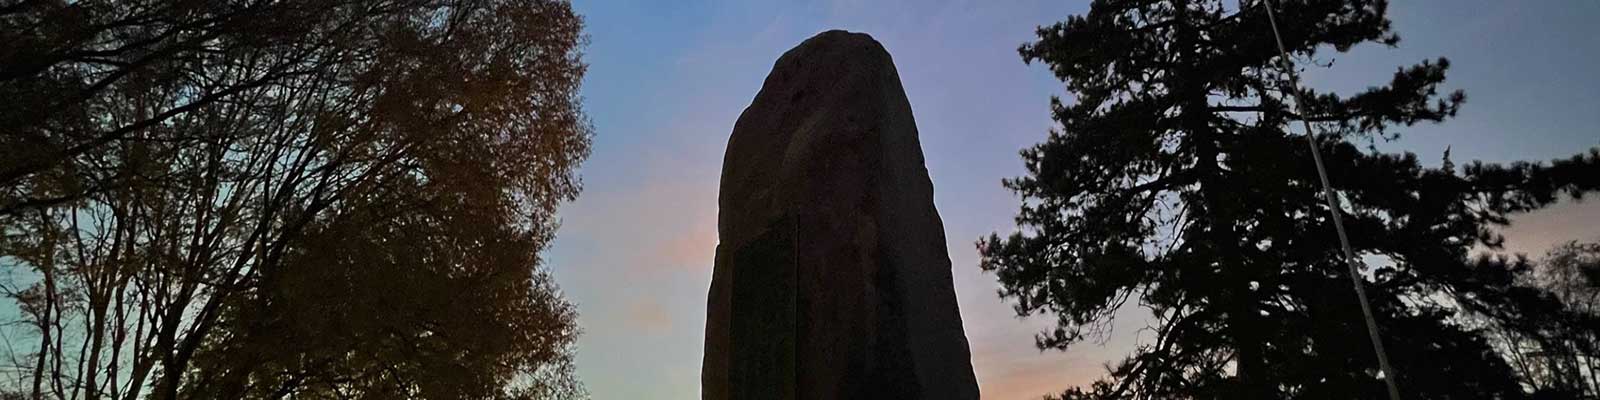 tall rock stands against a sky at dusk